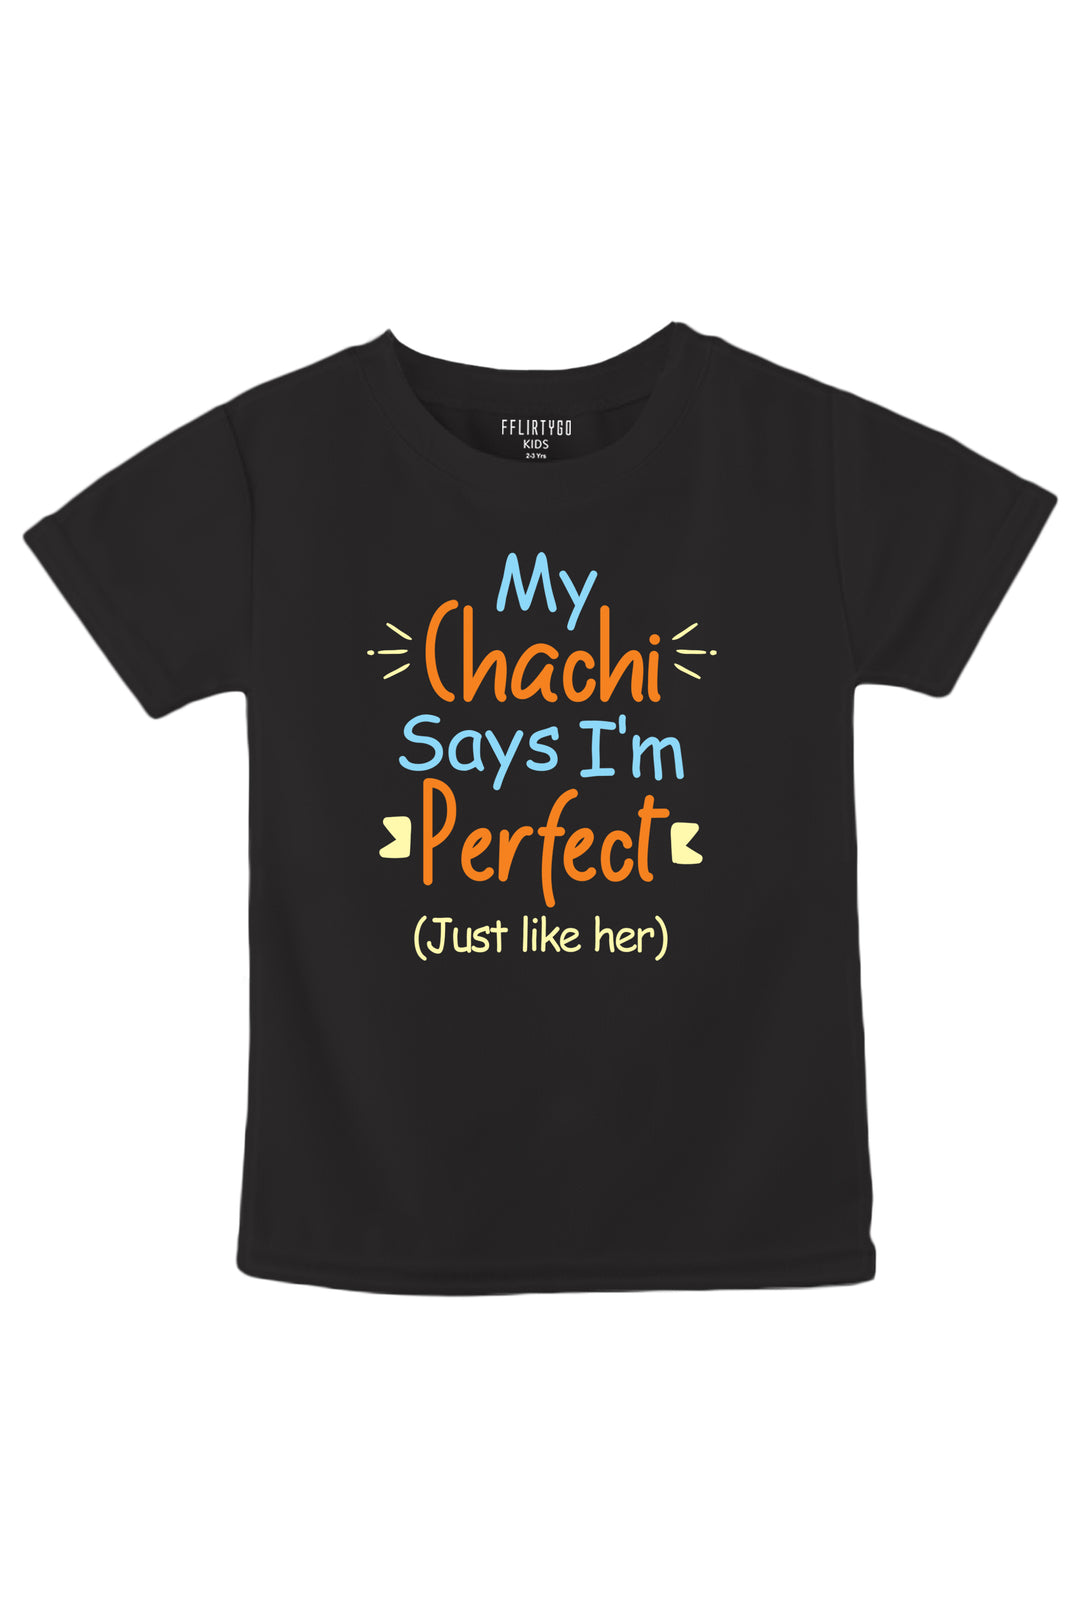 Chachi Say's I Am Perfect